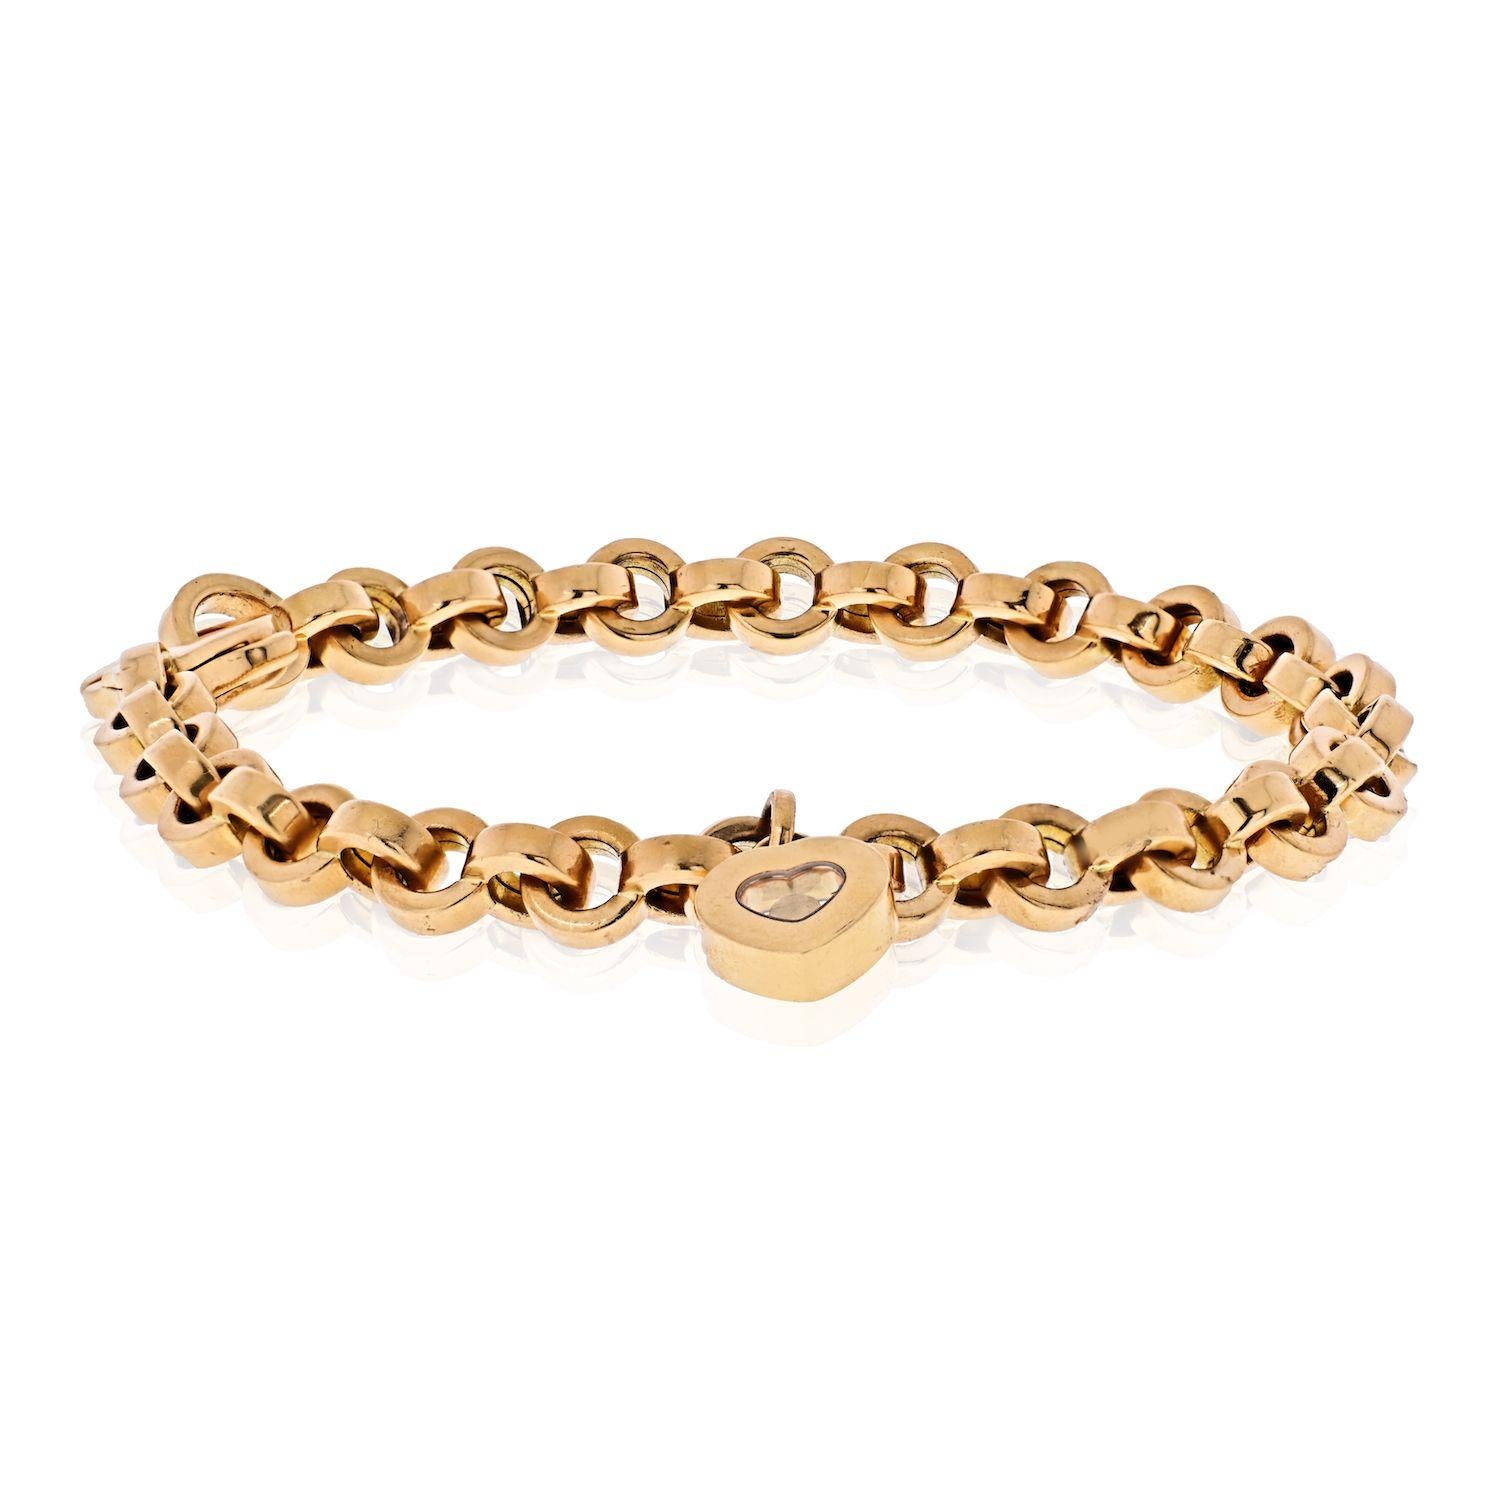 Chopard Happy Diamonds 18K Yellow Gold Heart Charm Link Bracelet.
Length: 8 inches.
Heart is set with one diamond.